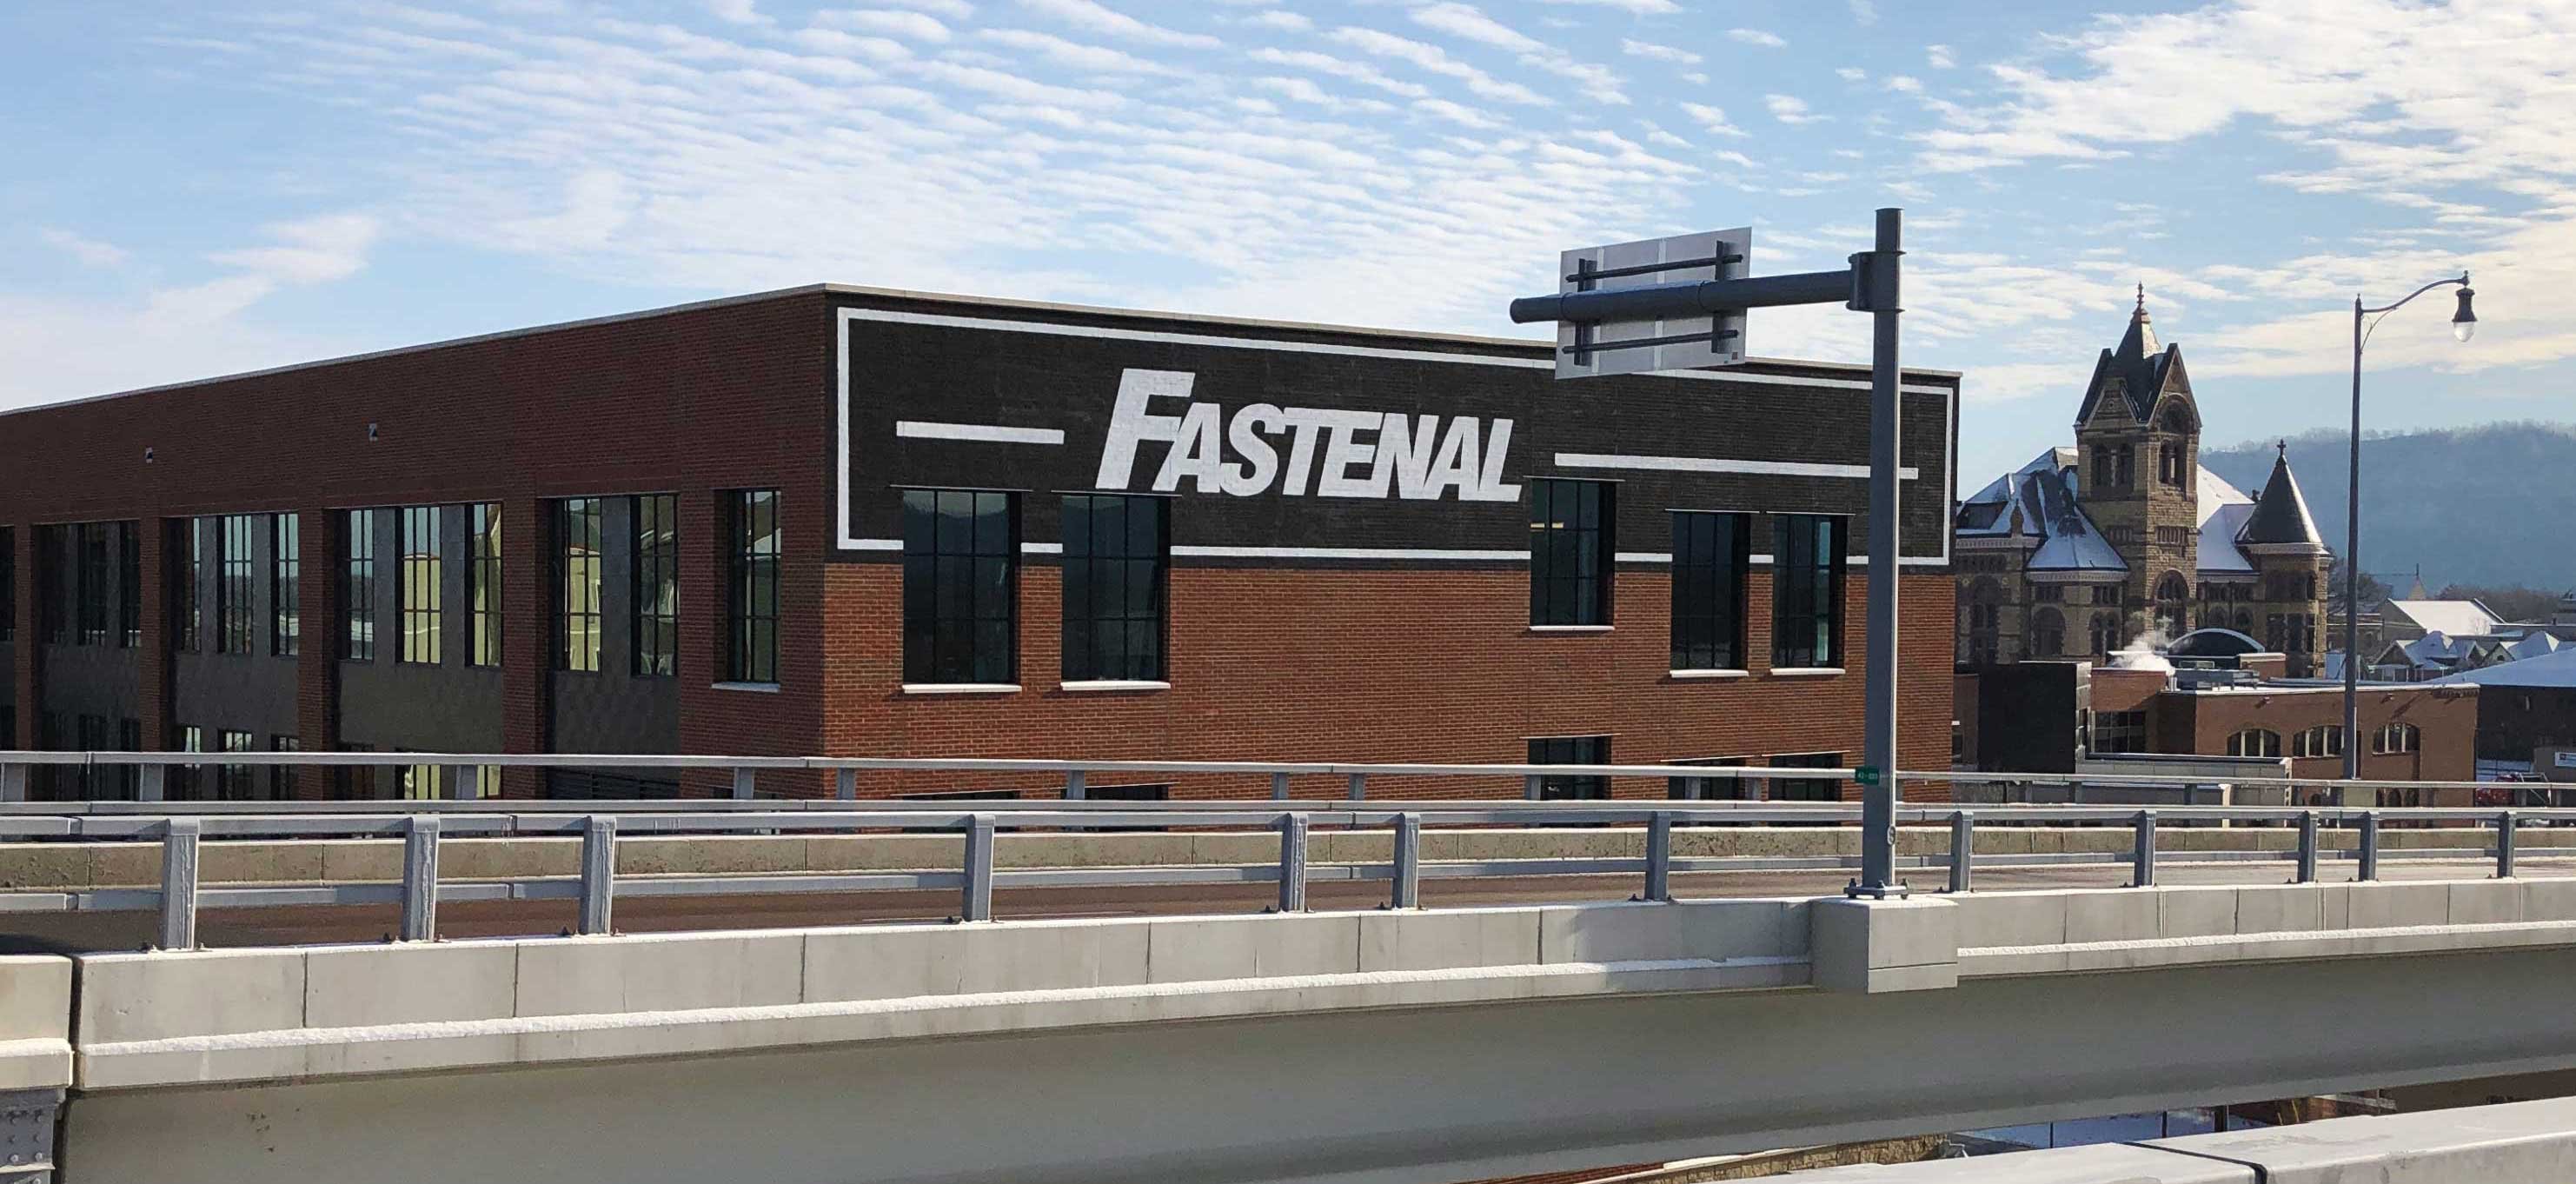 C.D. Smith Construction Manager for Fastenal Corporate Office Mass Timber Building Exterior view from highway